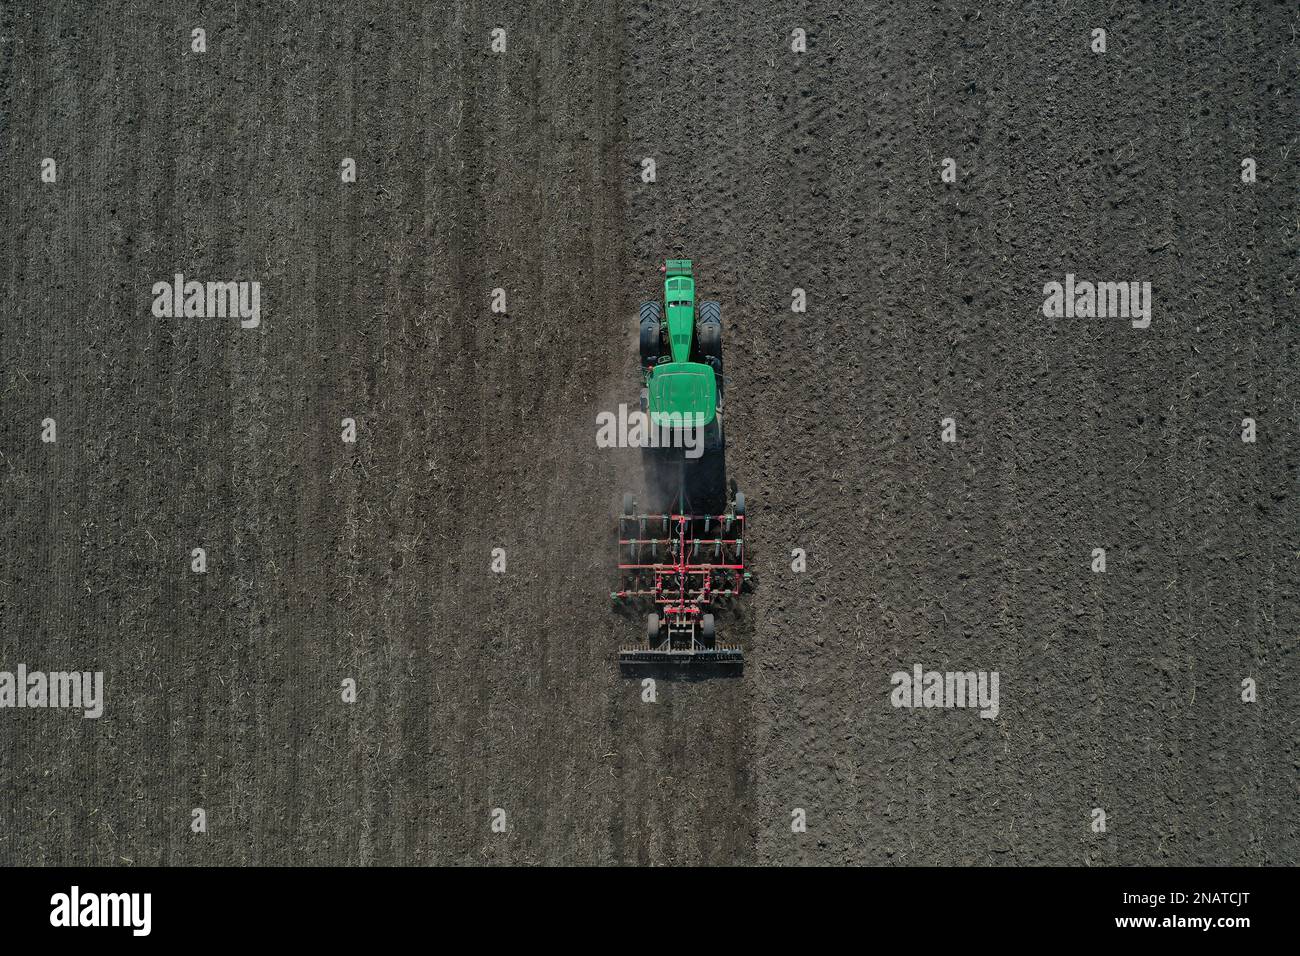 The farmer works with the tractor during the early spring season. Aerial view of mounted tractor while working. Stock Photo